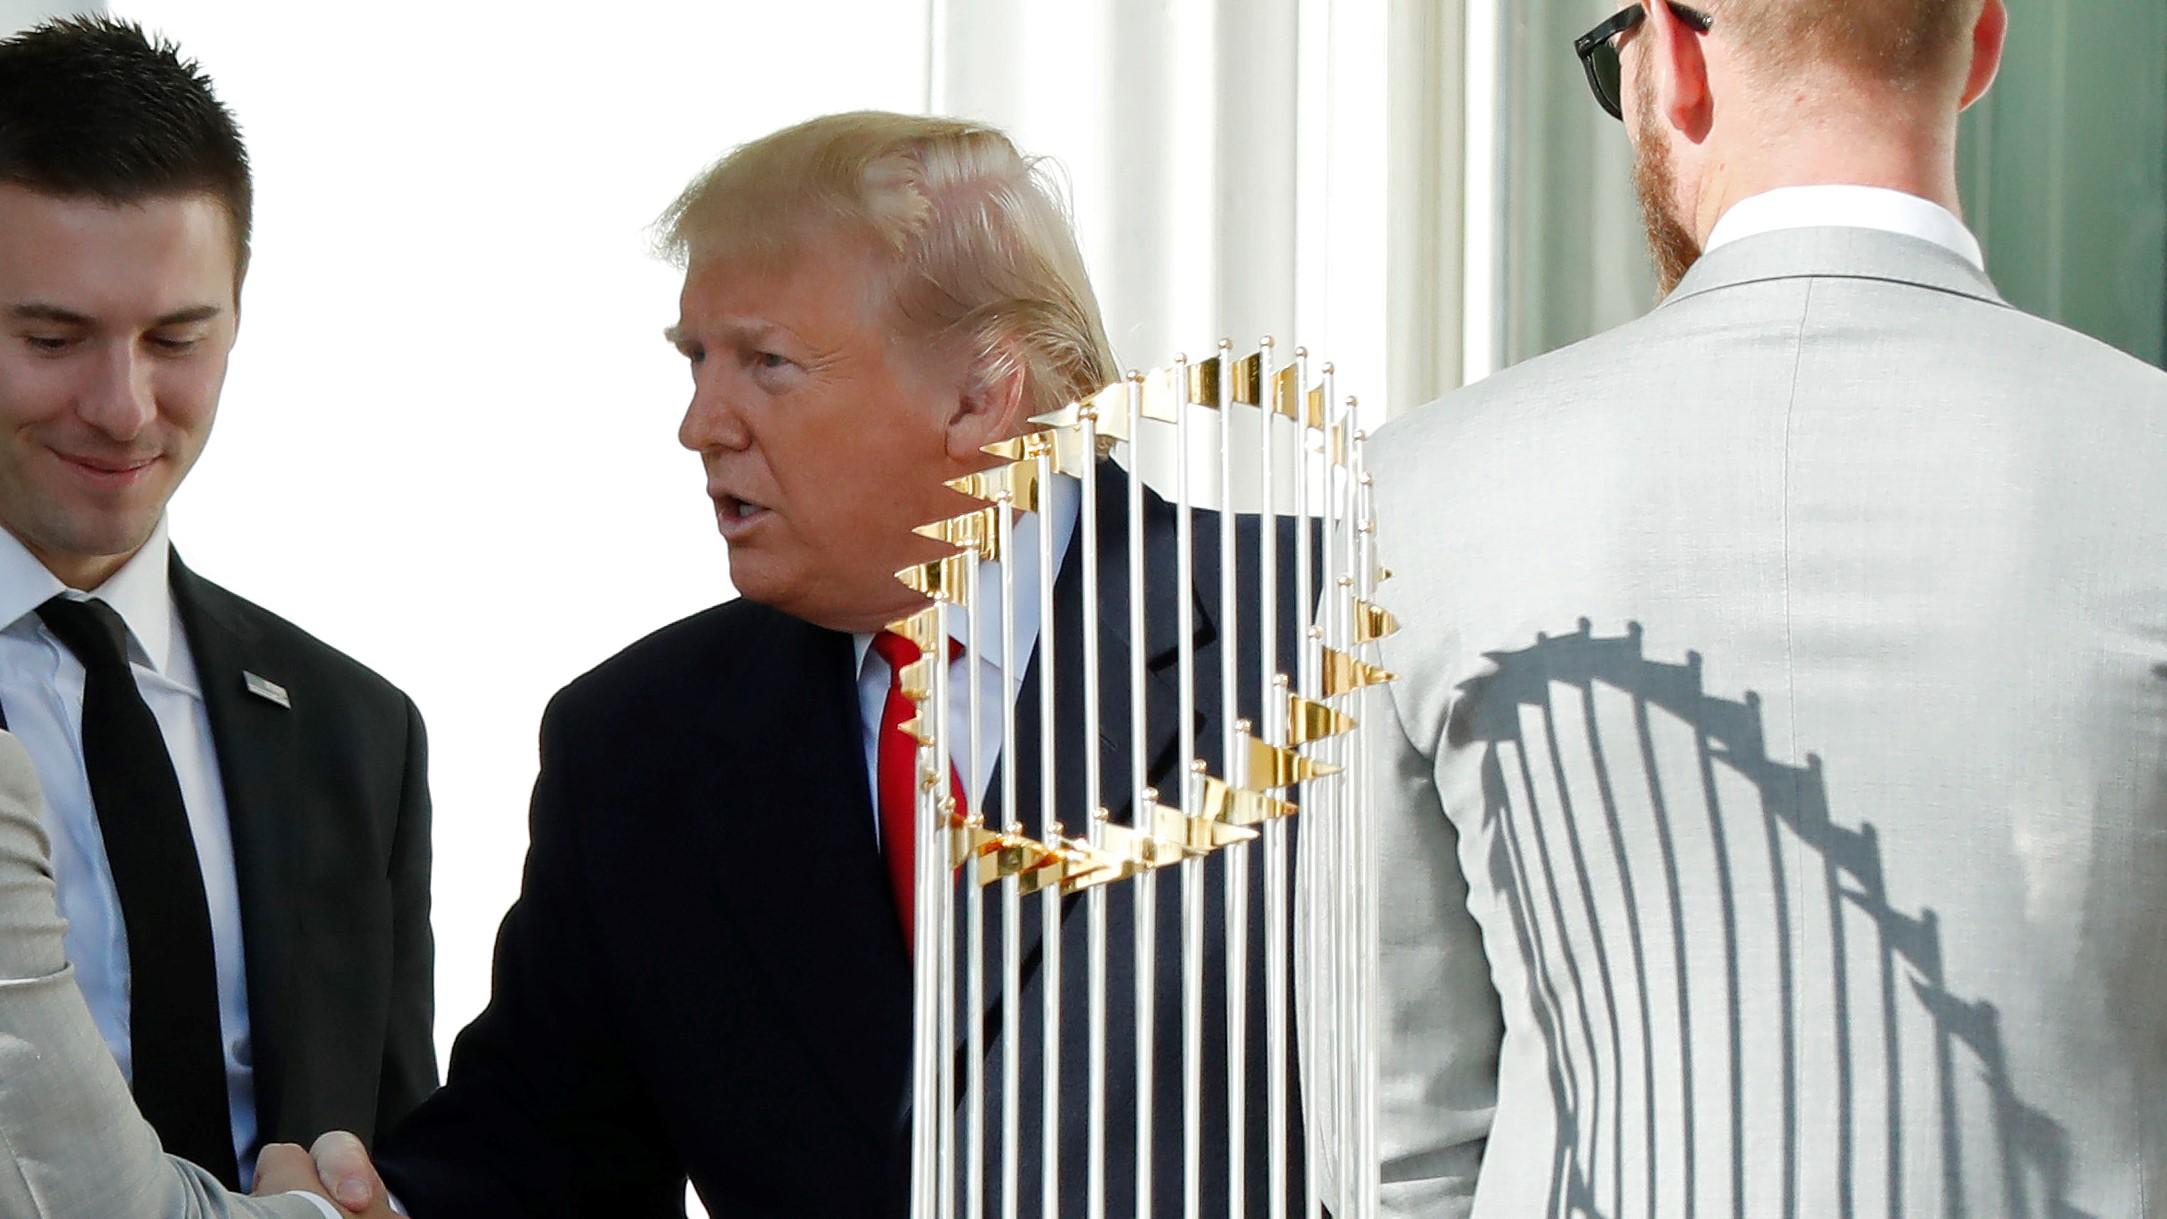 Nov 4, 2019; Washington, D.C., USA; President Donald Trump, (M) shakes hands with Washington Nationals starting pitcher Anibal Sanchez (L) as Nationals starting pitcher Patrick Corbin (M-L) and Nationals starting pitcher Stephen Strasburg (R) look on during a ceremony honoring the 2019 World Series champion Nationals on the South Portico at The White House. Mandatory Credit: Geoff Burke-USA TODAY Sports / Geoff Burke-USA TODAY Sports